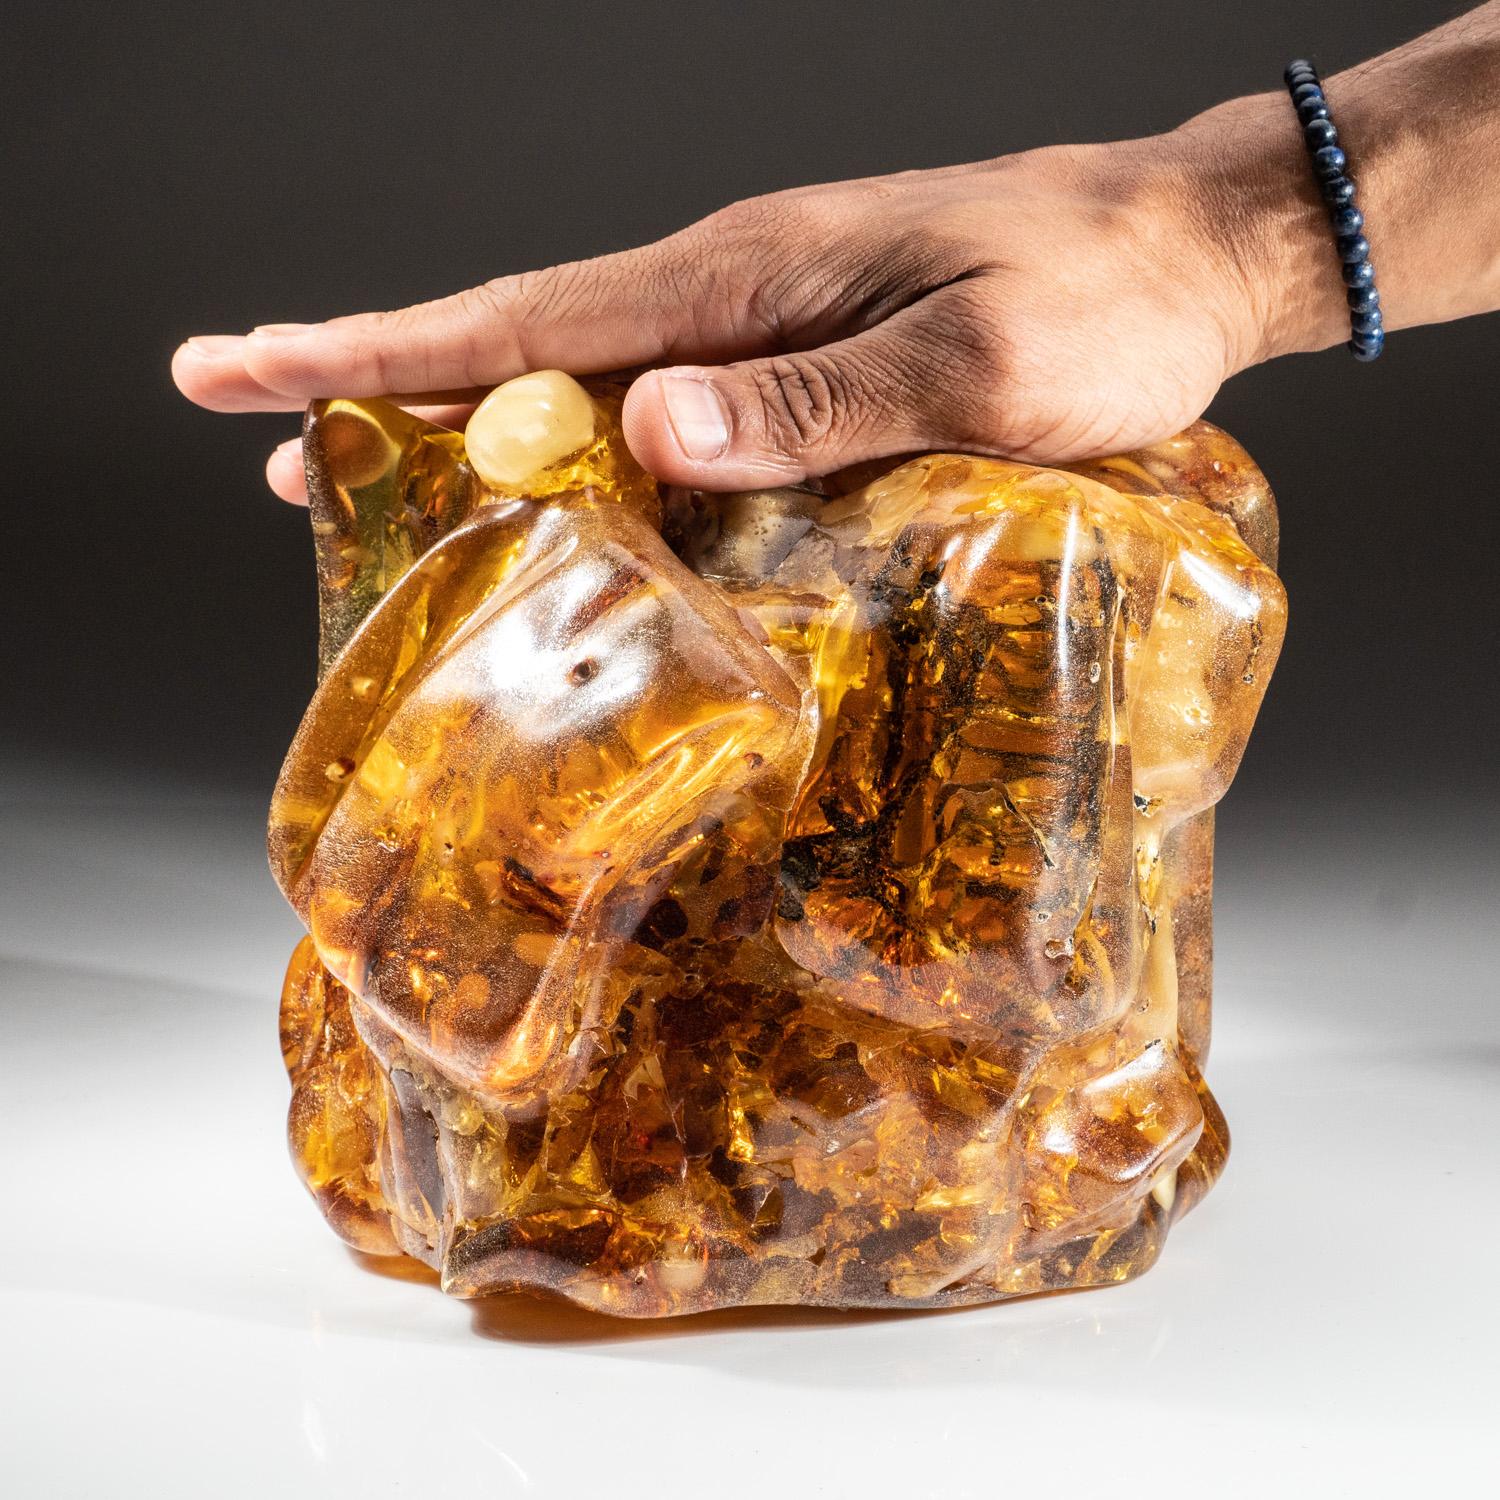 This specimen is a large, museum quality piece of Colombian Copal. It is some of the highest quality Copal in the world. Copal is geologically younger than Amber. Copal is known for containing excellent insect specimens, as seen in this giant